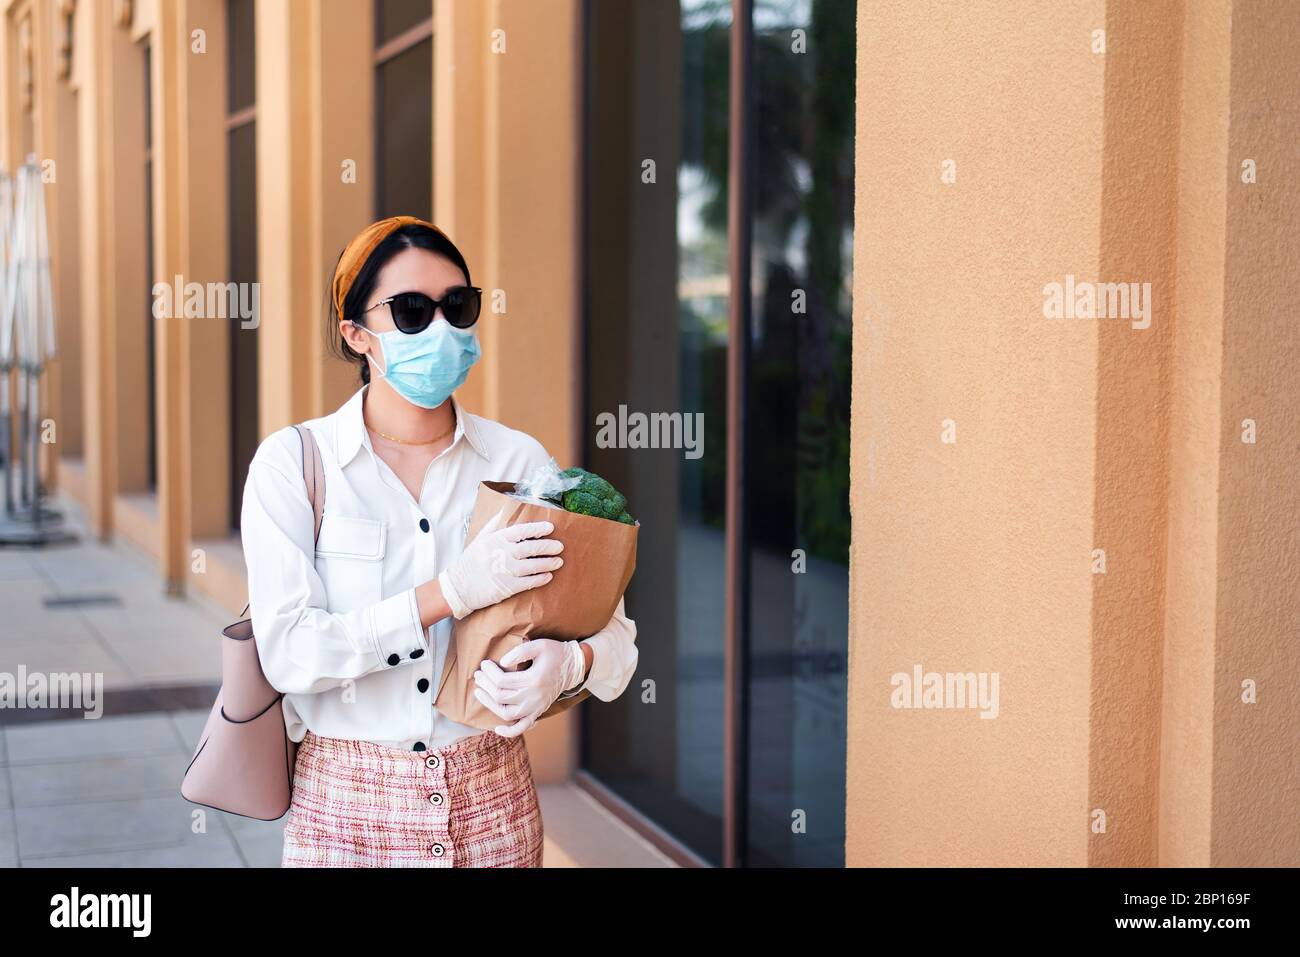 Asian woman carrying shopping bag with groceries while wearing mask and gloves to prevent virus spread during coronavirus pandemic Stock Photo